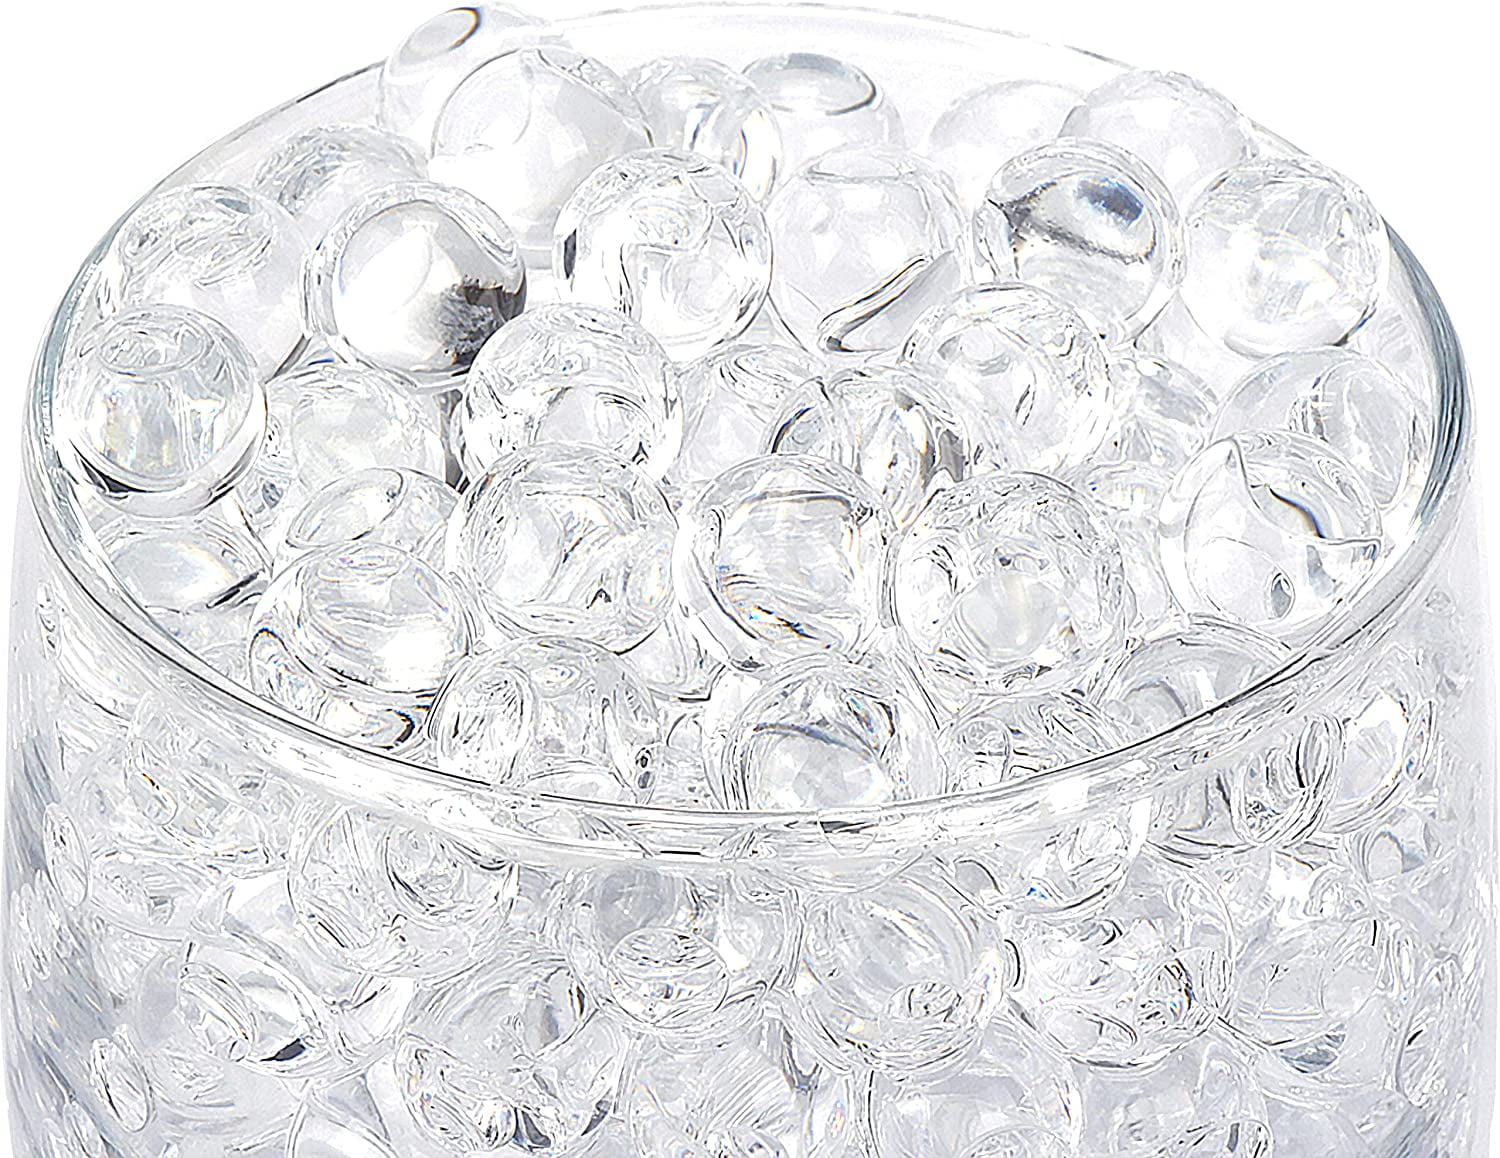 50,000 Pcs Water Gel Beads Clear Vase Filler Beads Water Growing Balls Vases  Crystal Jelly Balls for Floating Floral Candle Pearls Wedding Centerpiece